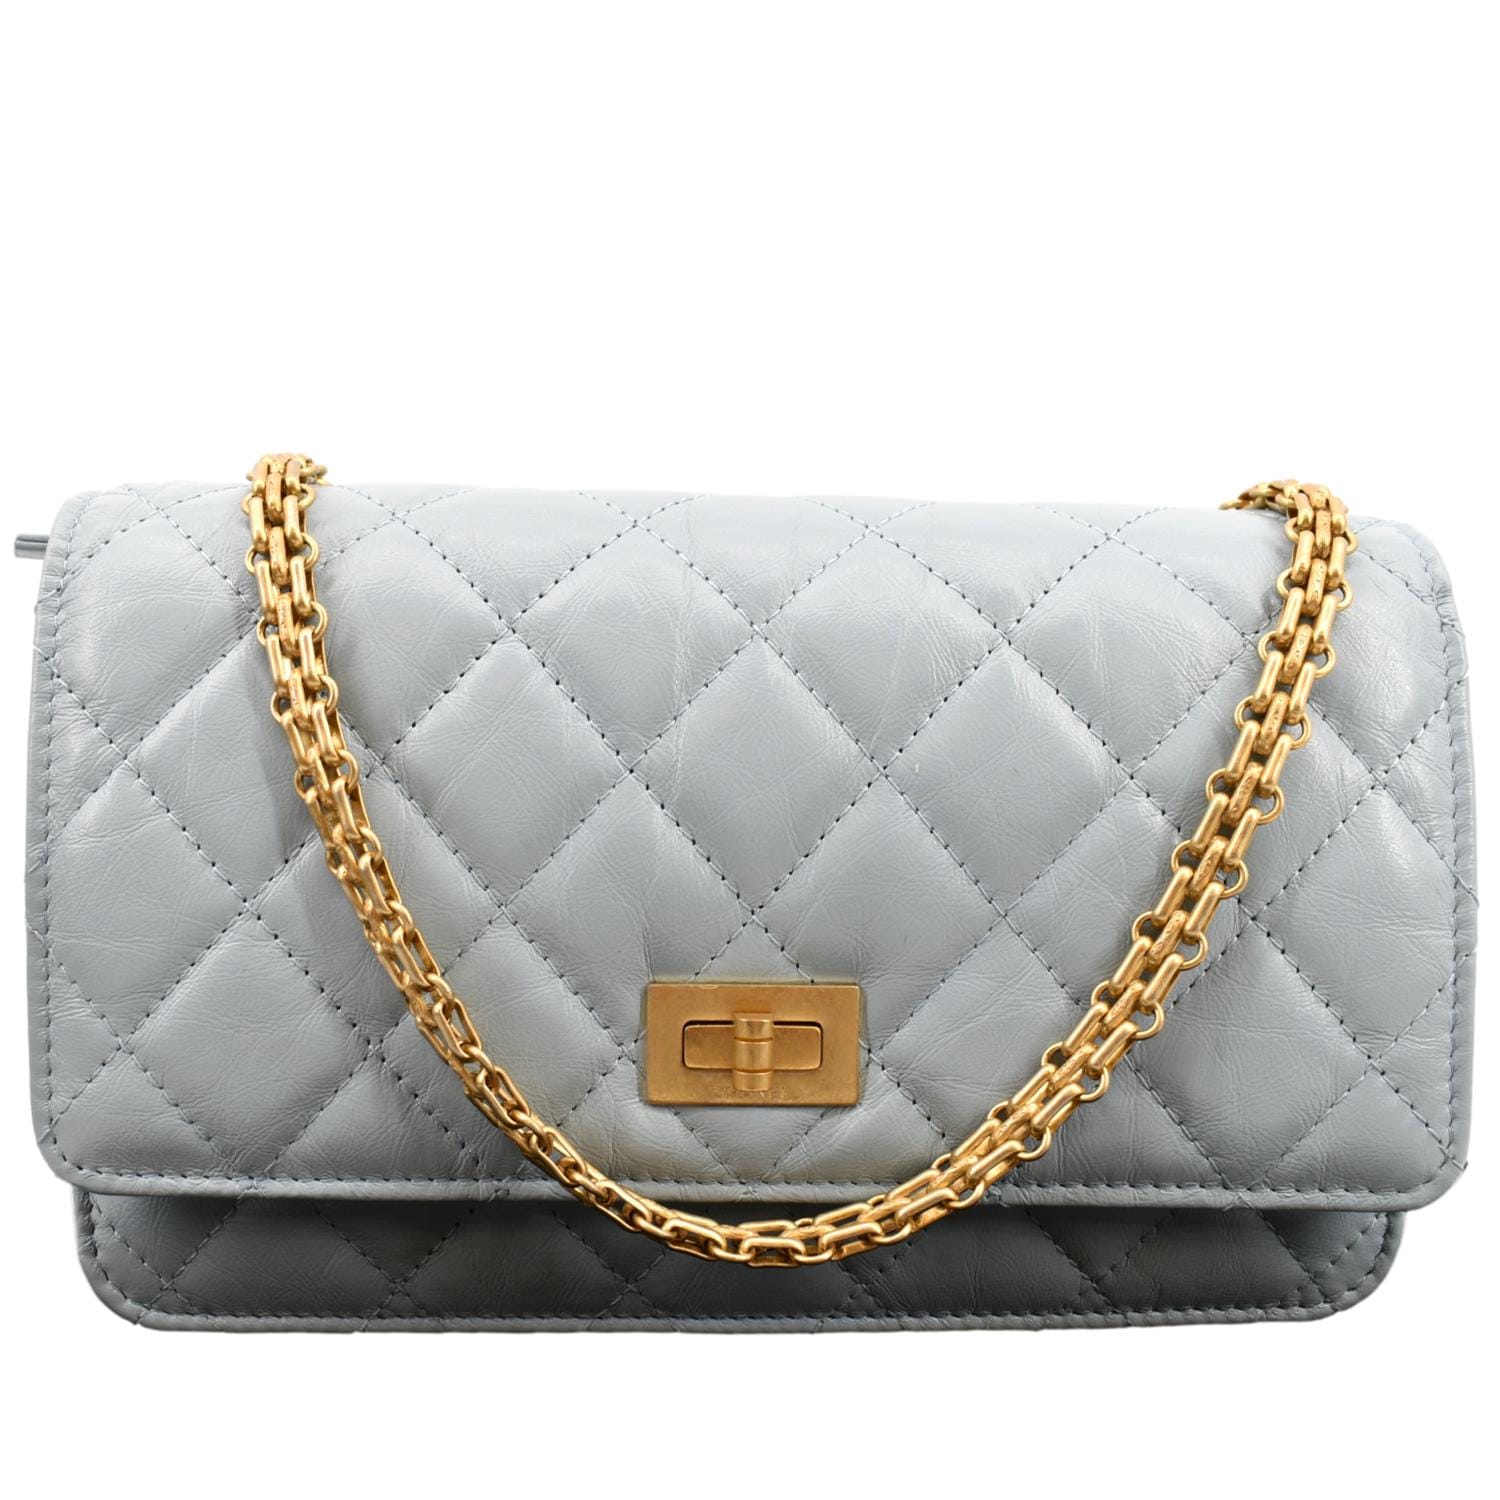 Bonhams : CHANEL LIMITED EDITION BLACK QUILTED LEATHER CLASSIC